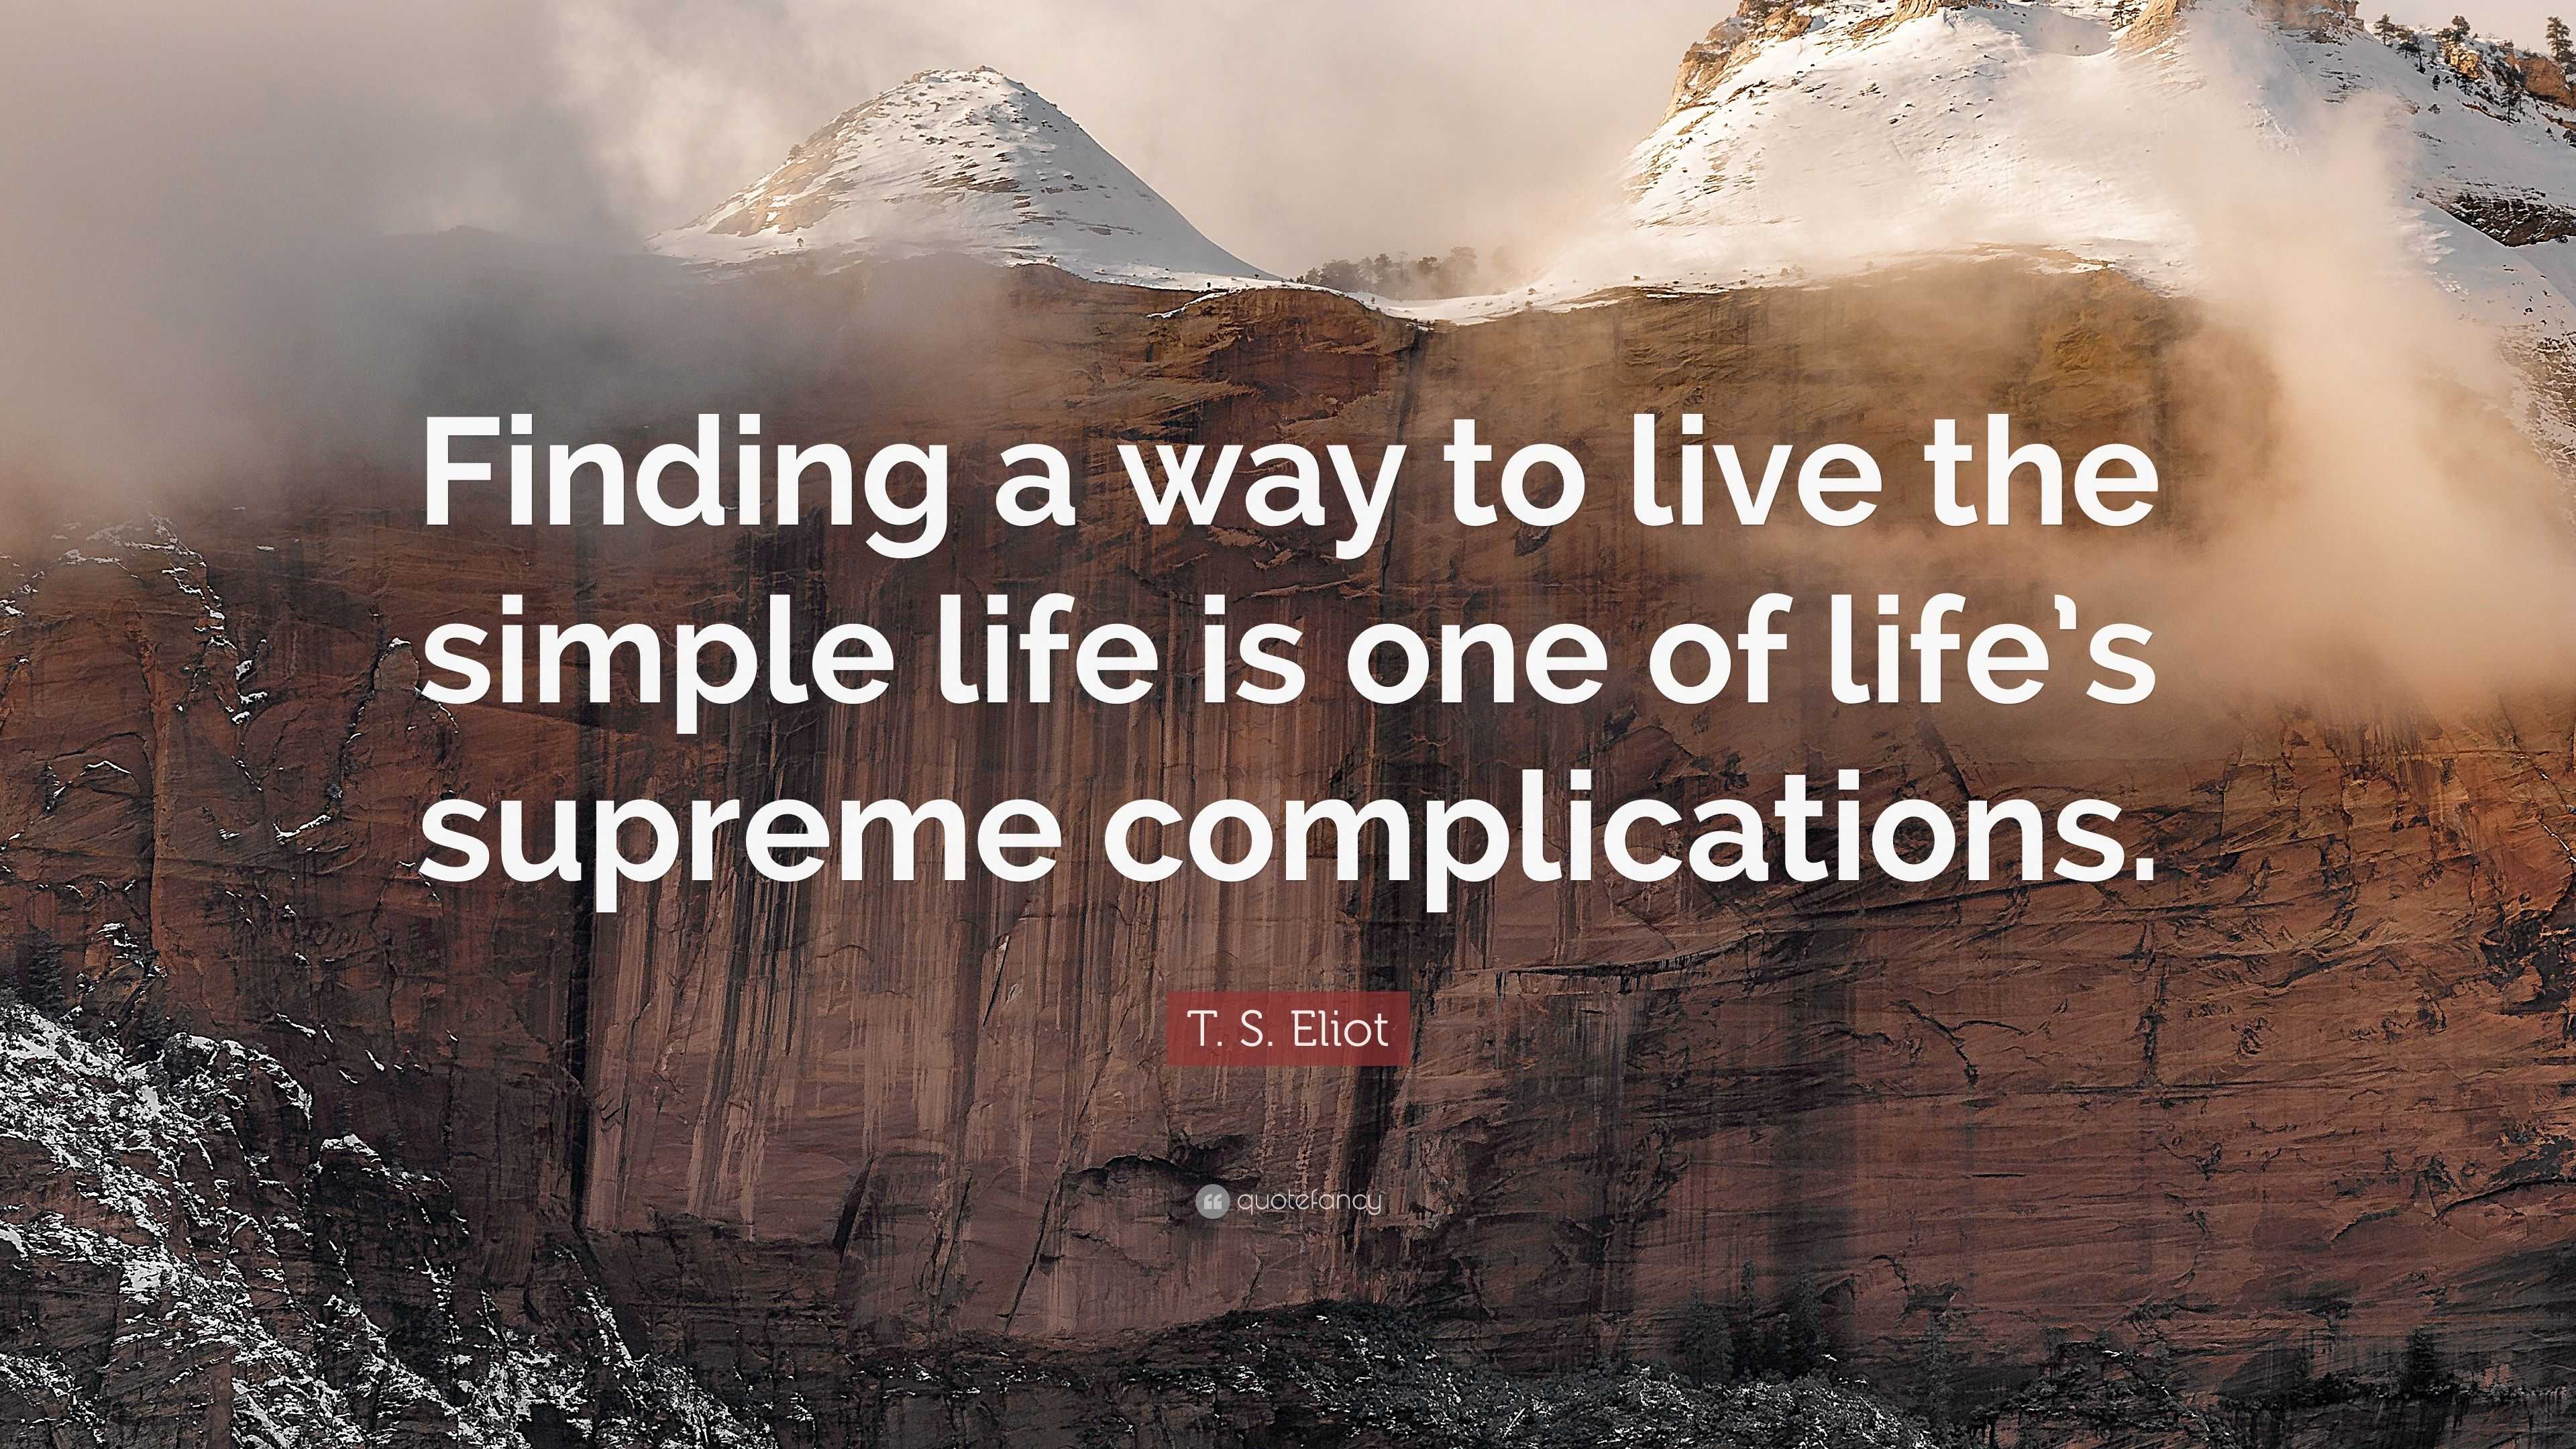 T S Eliot Quote “Finding a way to live the simple life is one of